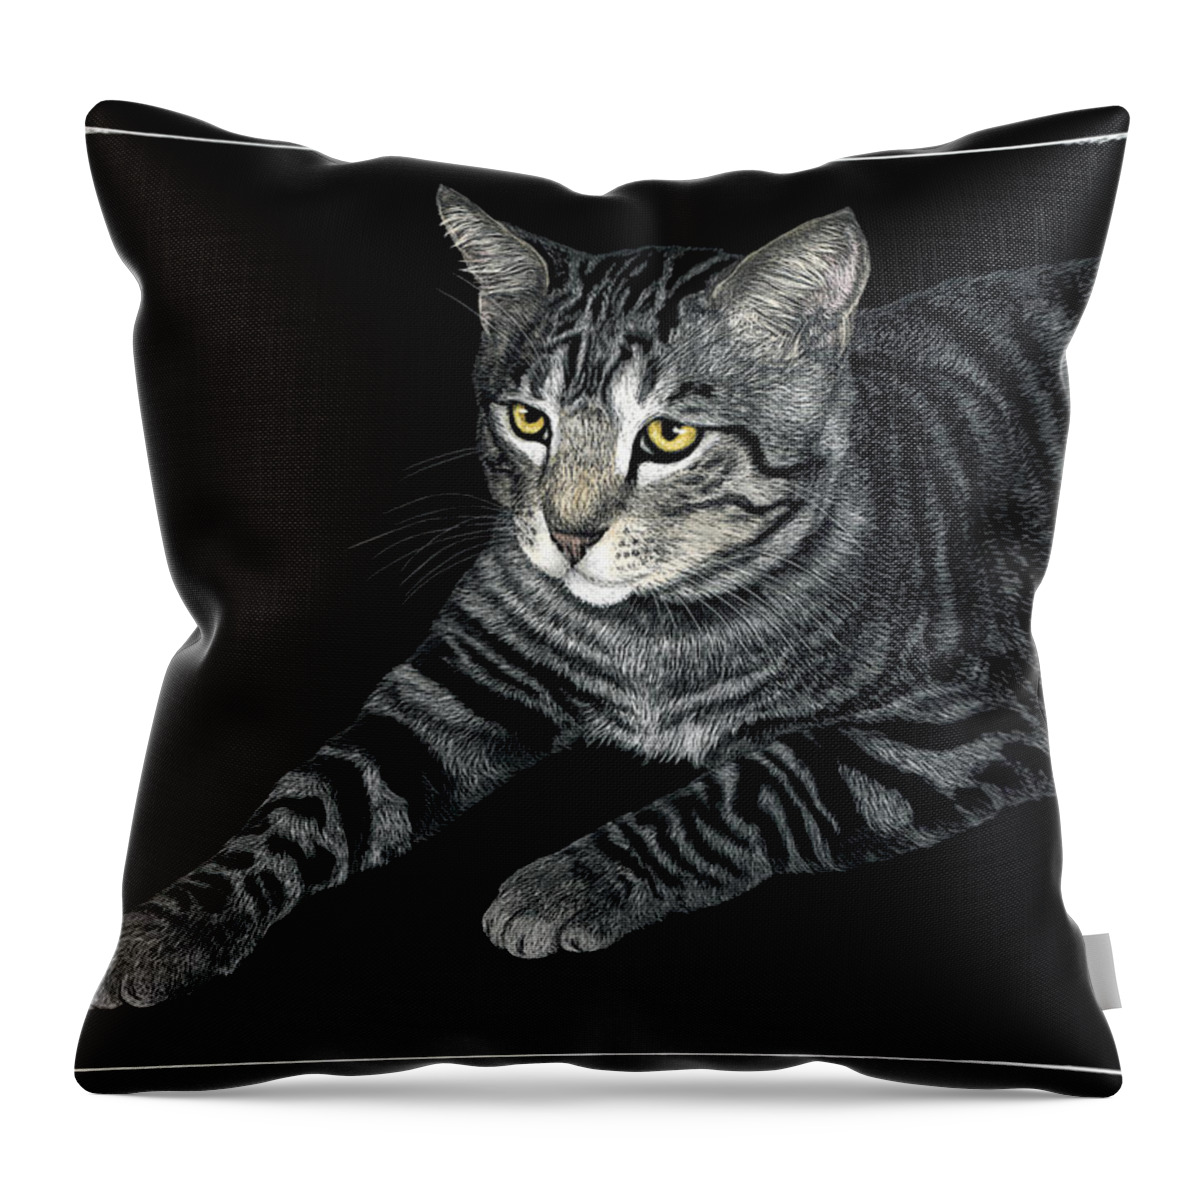 Cat Throw Pillow featuring the drawing The Mouser by Ann Ranlett